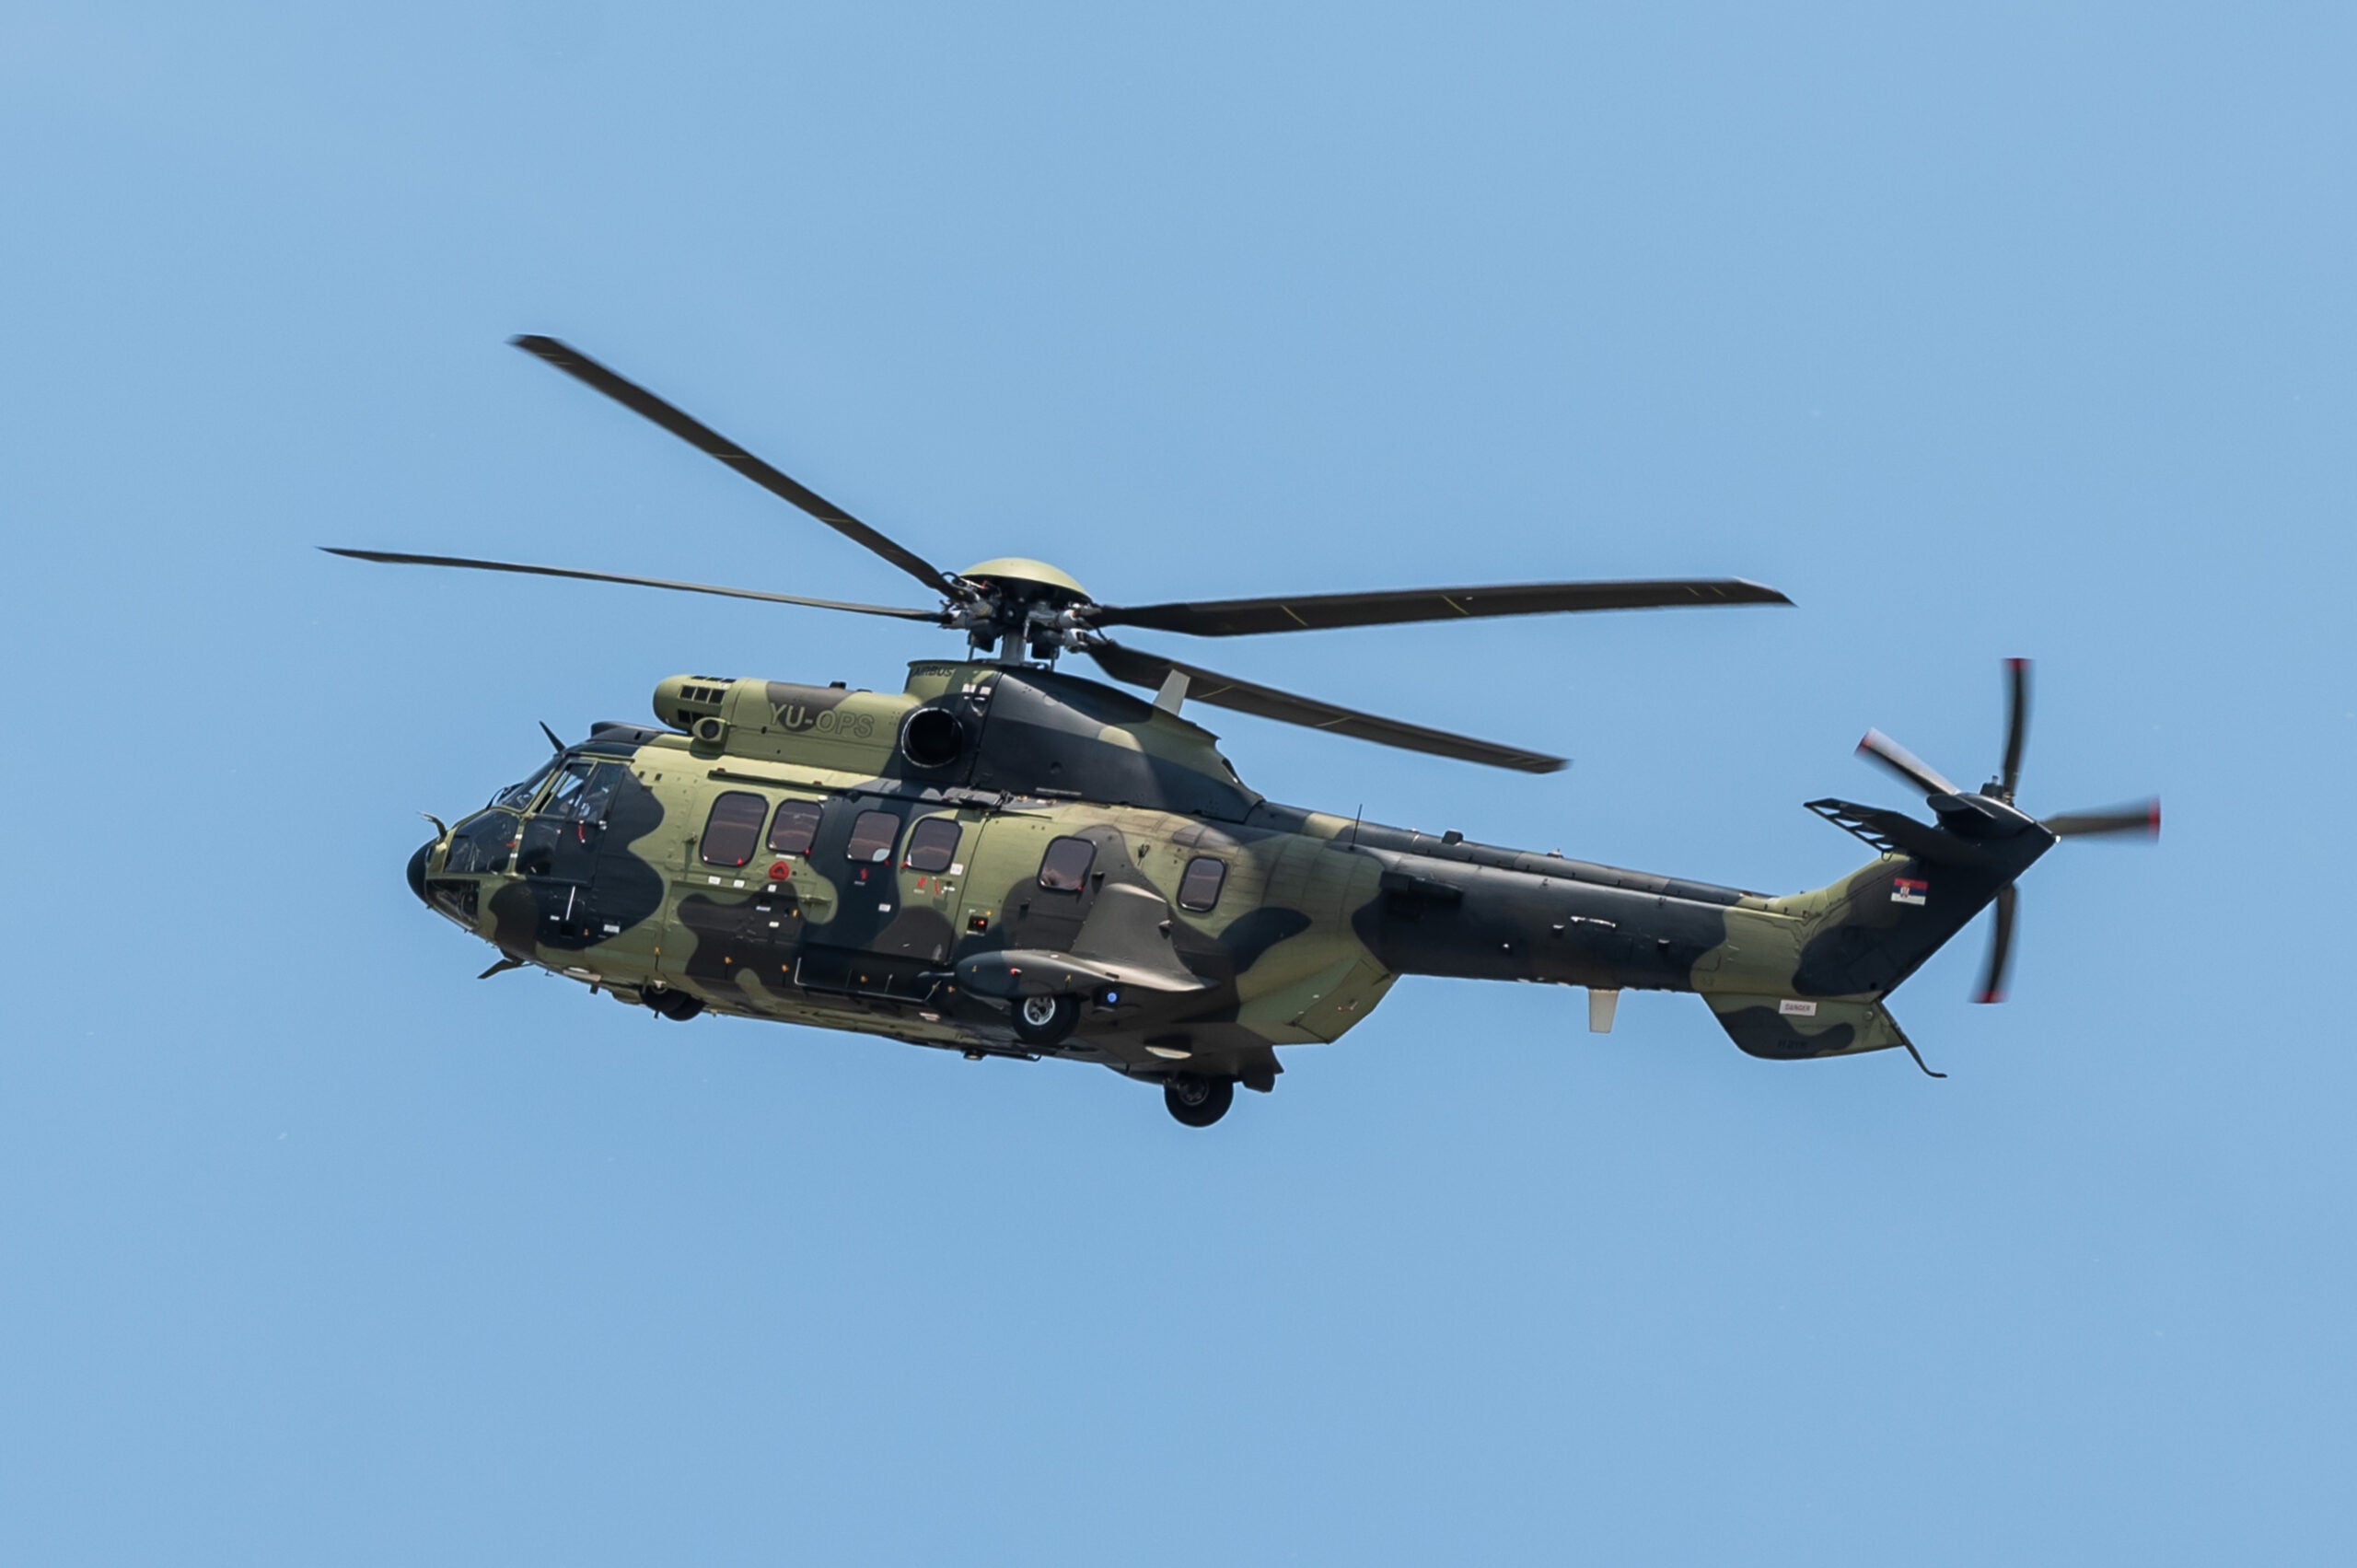 SYMBOL - 10 July 2023, Serbia, Belgrad: A helicopter of the French manufacturer Aérospatiale, used by the Serbian police, flies over Nikola Tesla Airport. Photo: Silas Stein/dpa (Photo by Silas Stein/picture alliance via Getty Images)